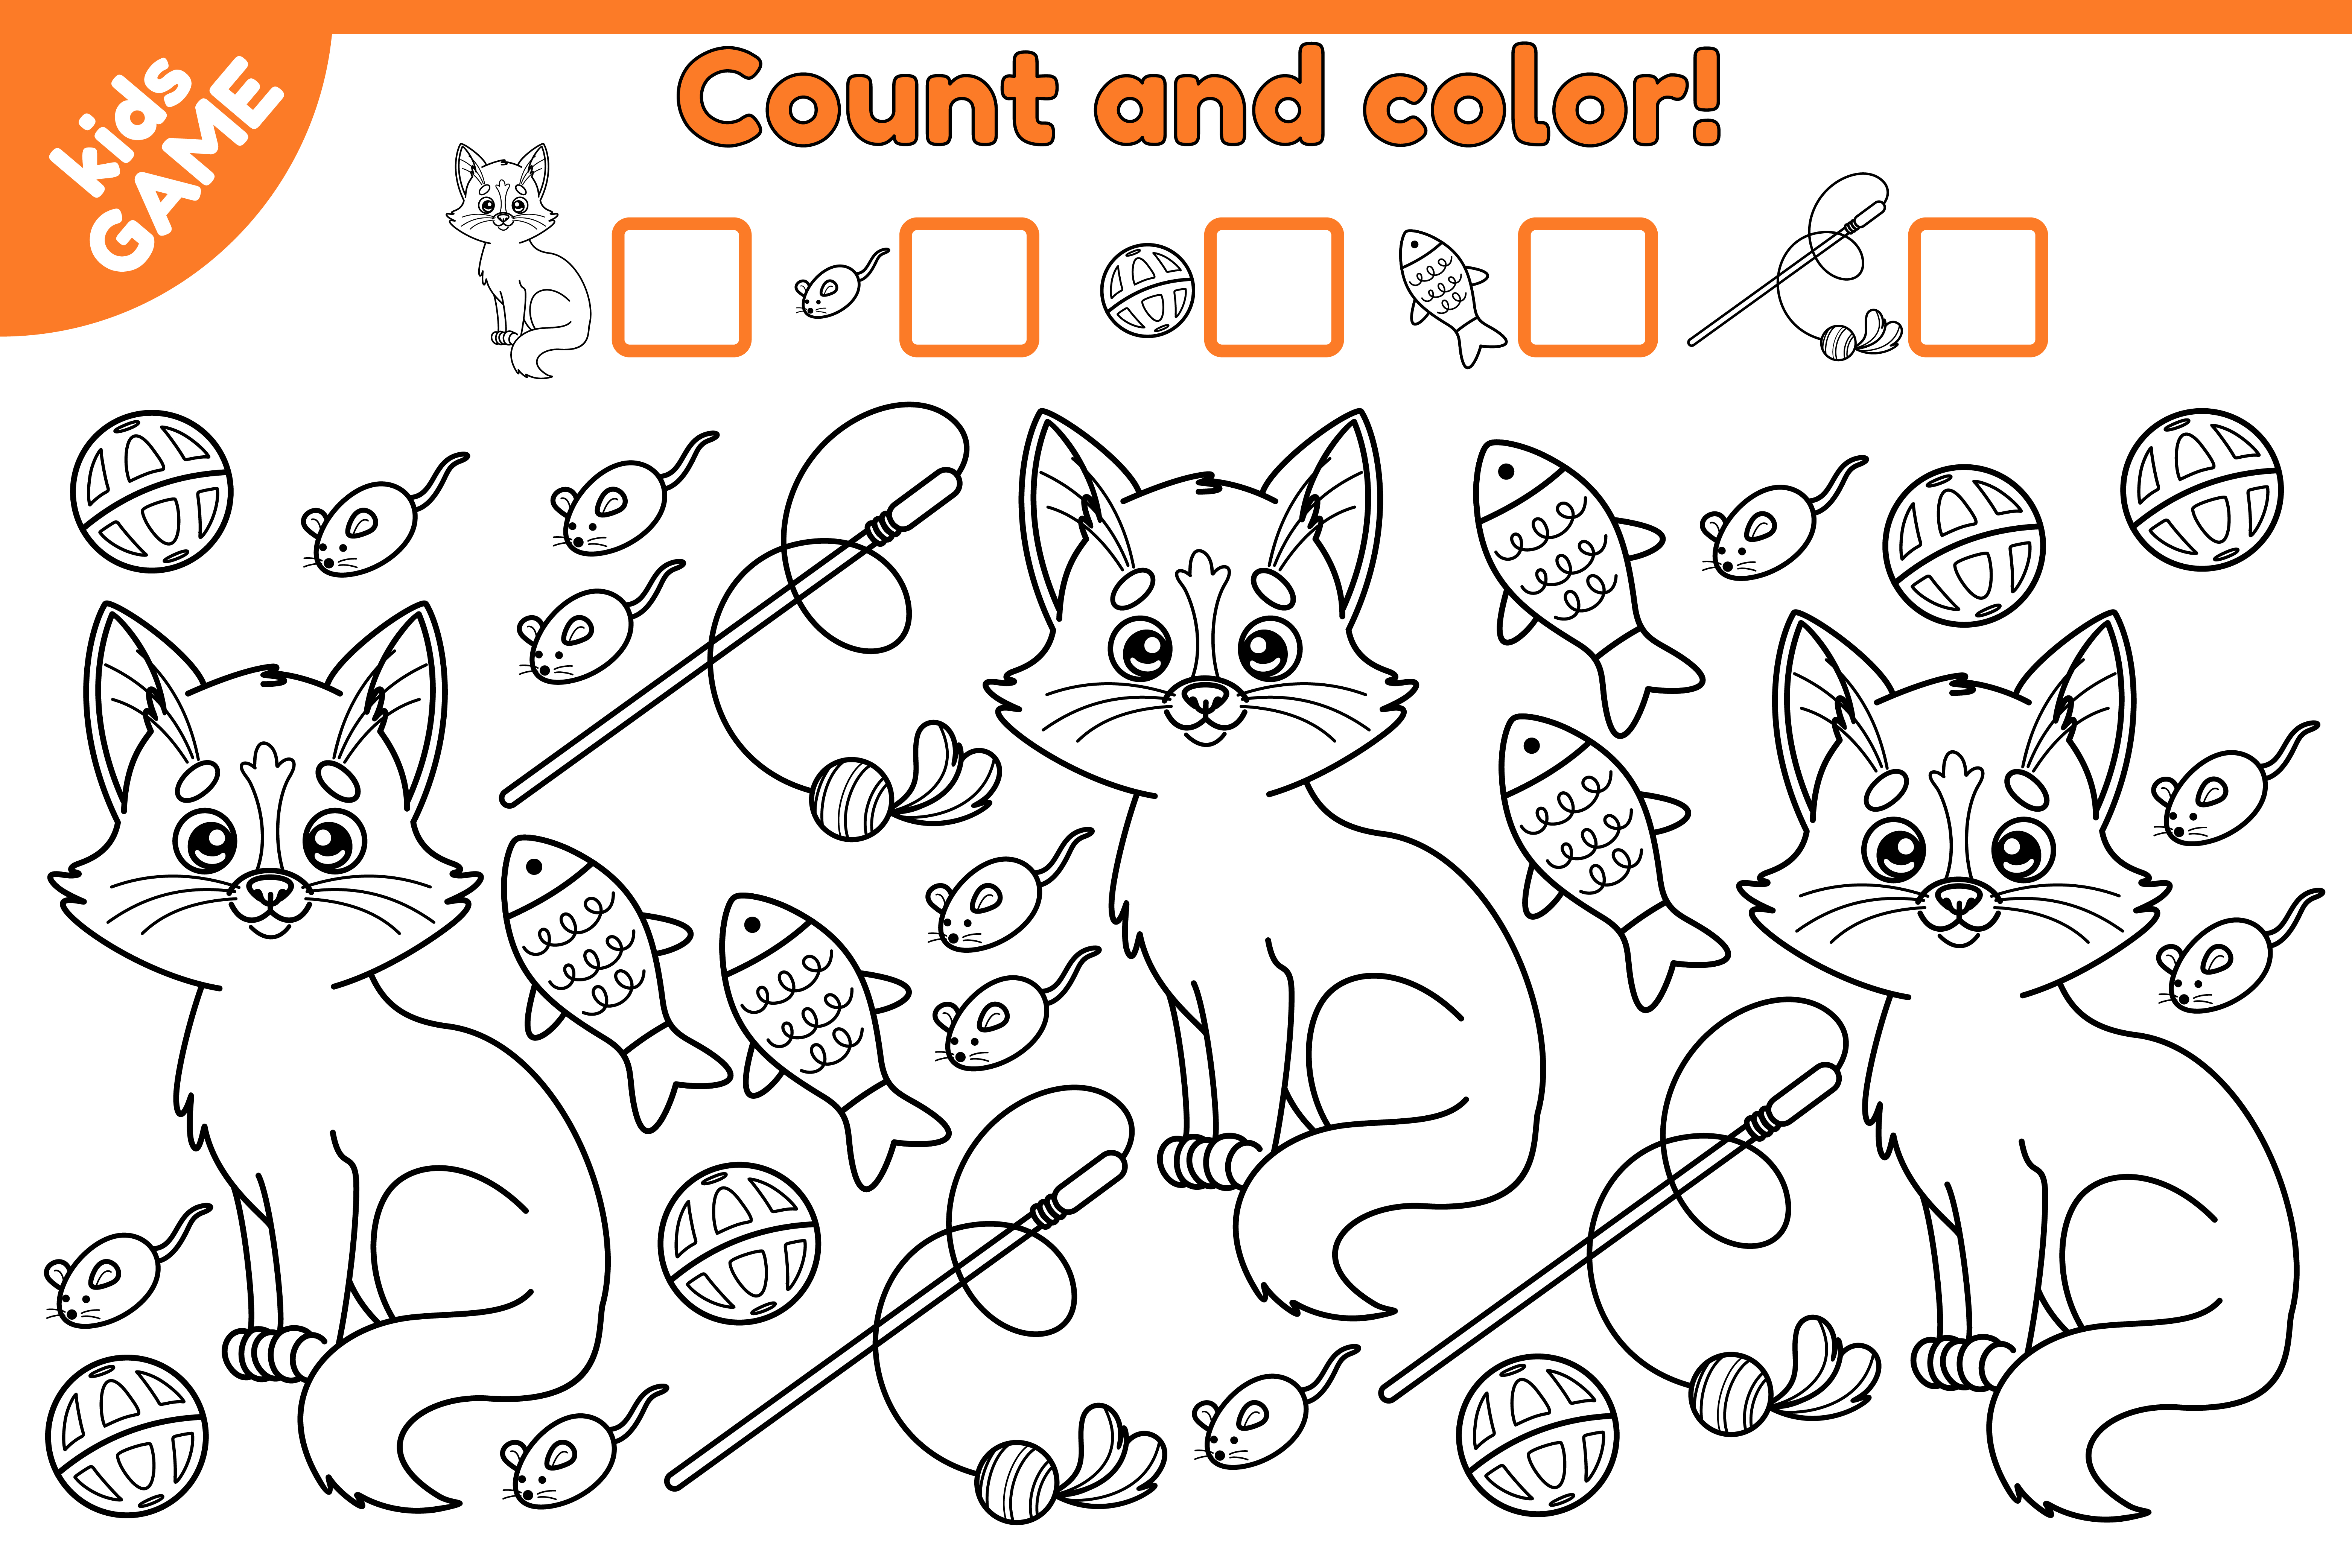 Count and color math game cartoon cat with toys 1